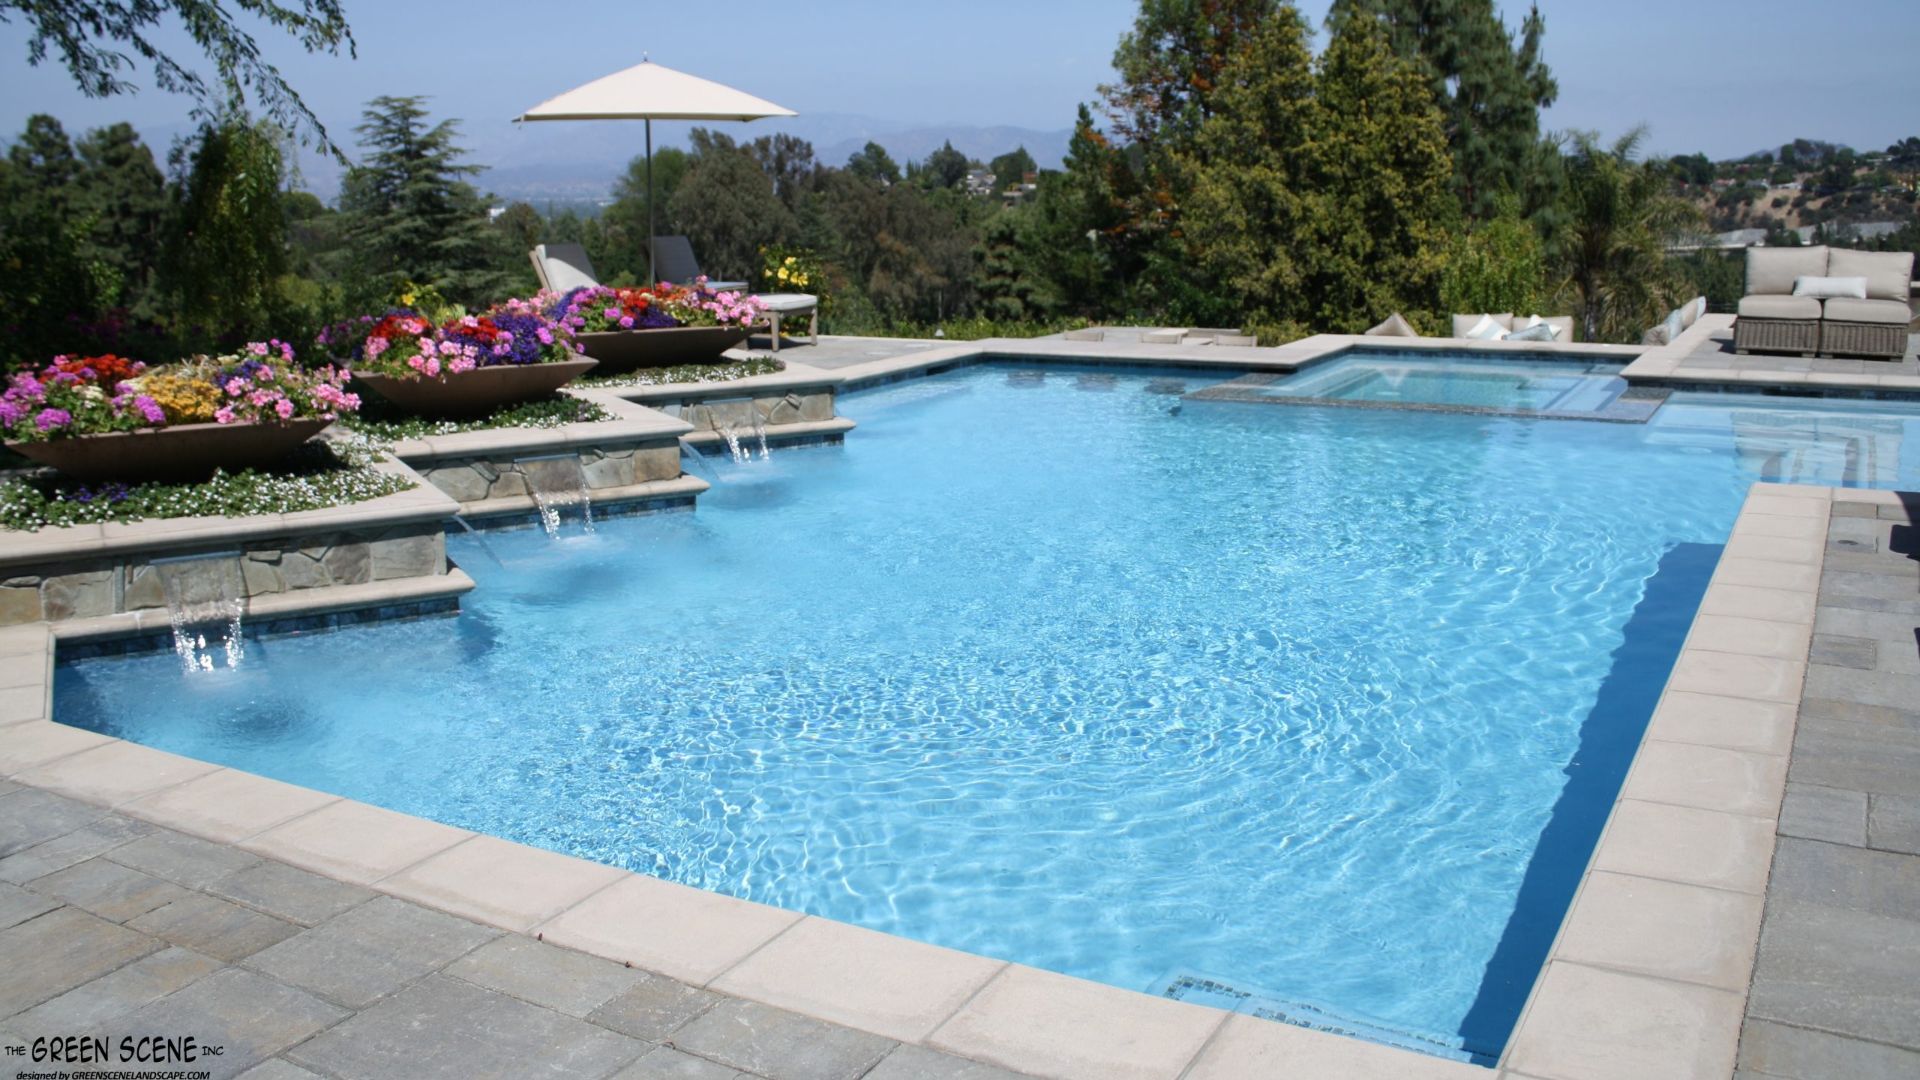 Build a pool in California with water features and landscaping